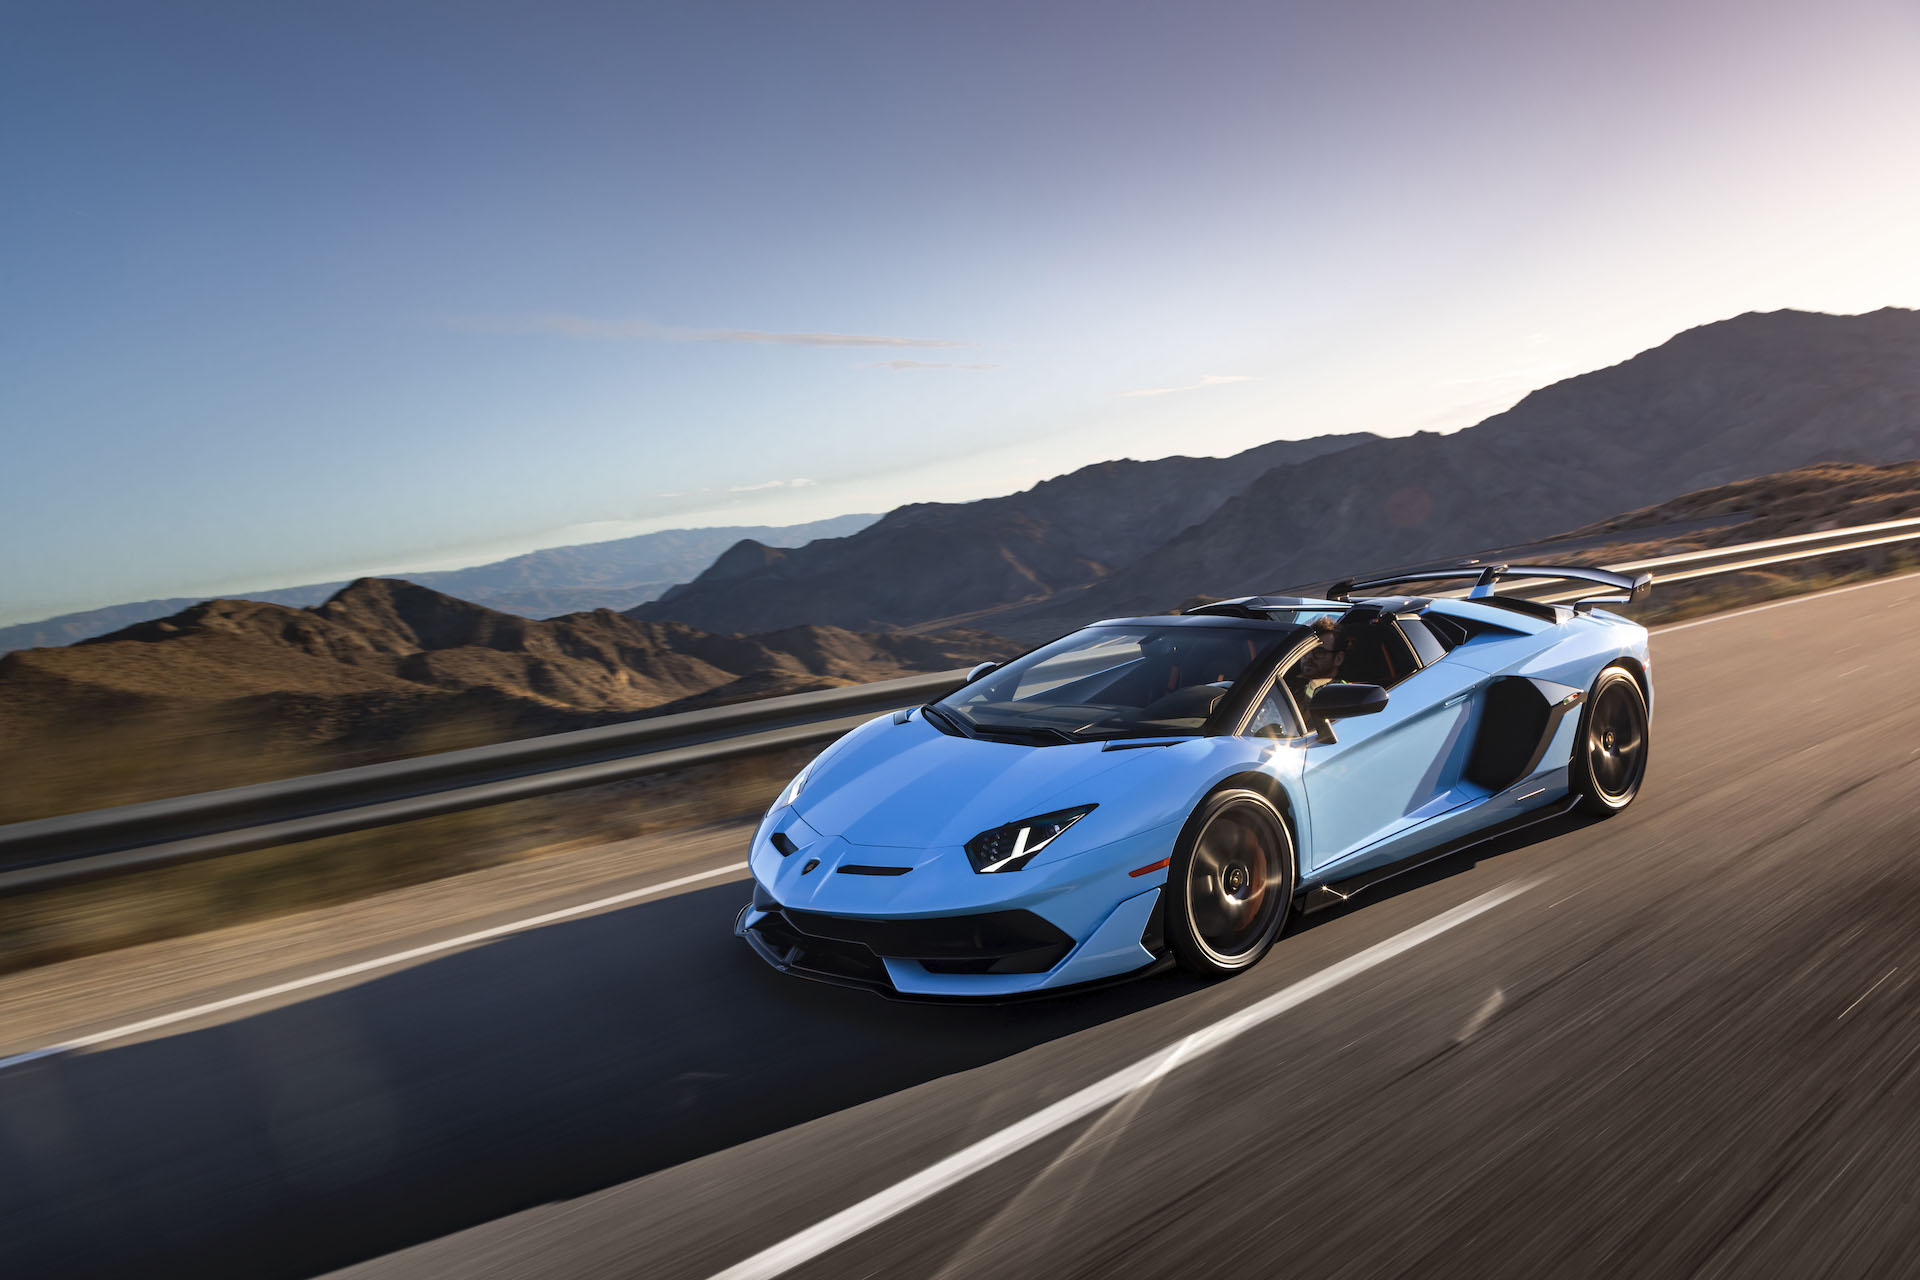 Lamborghini Aventador SVJ recalled because owners could get trapped inside